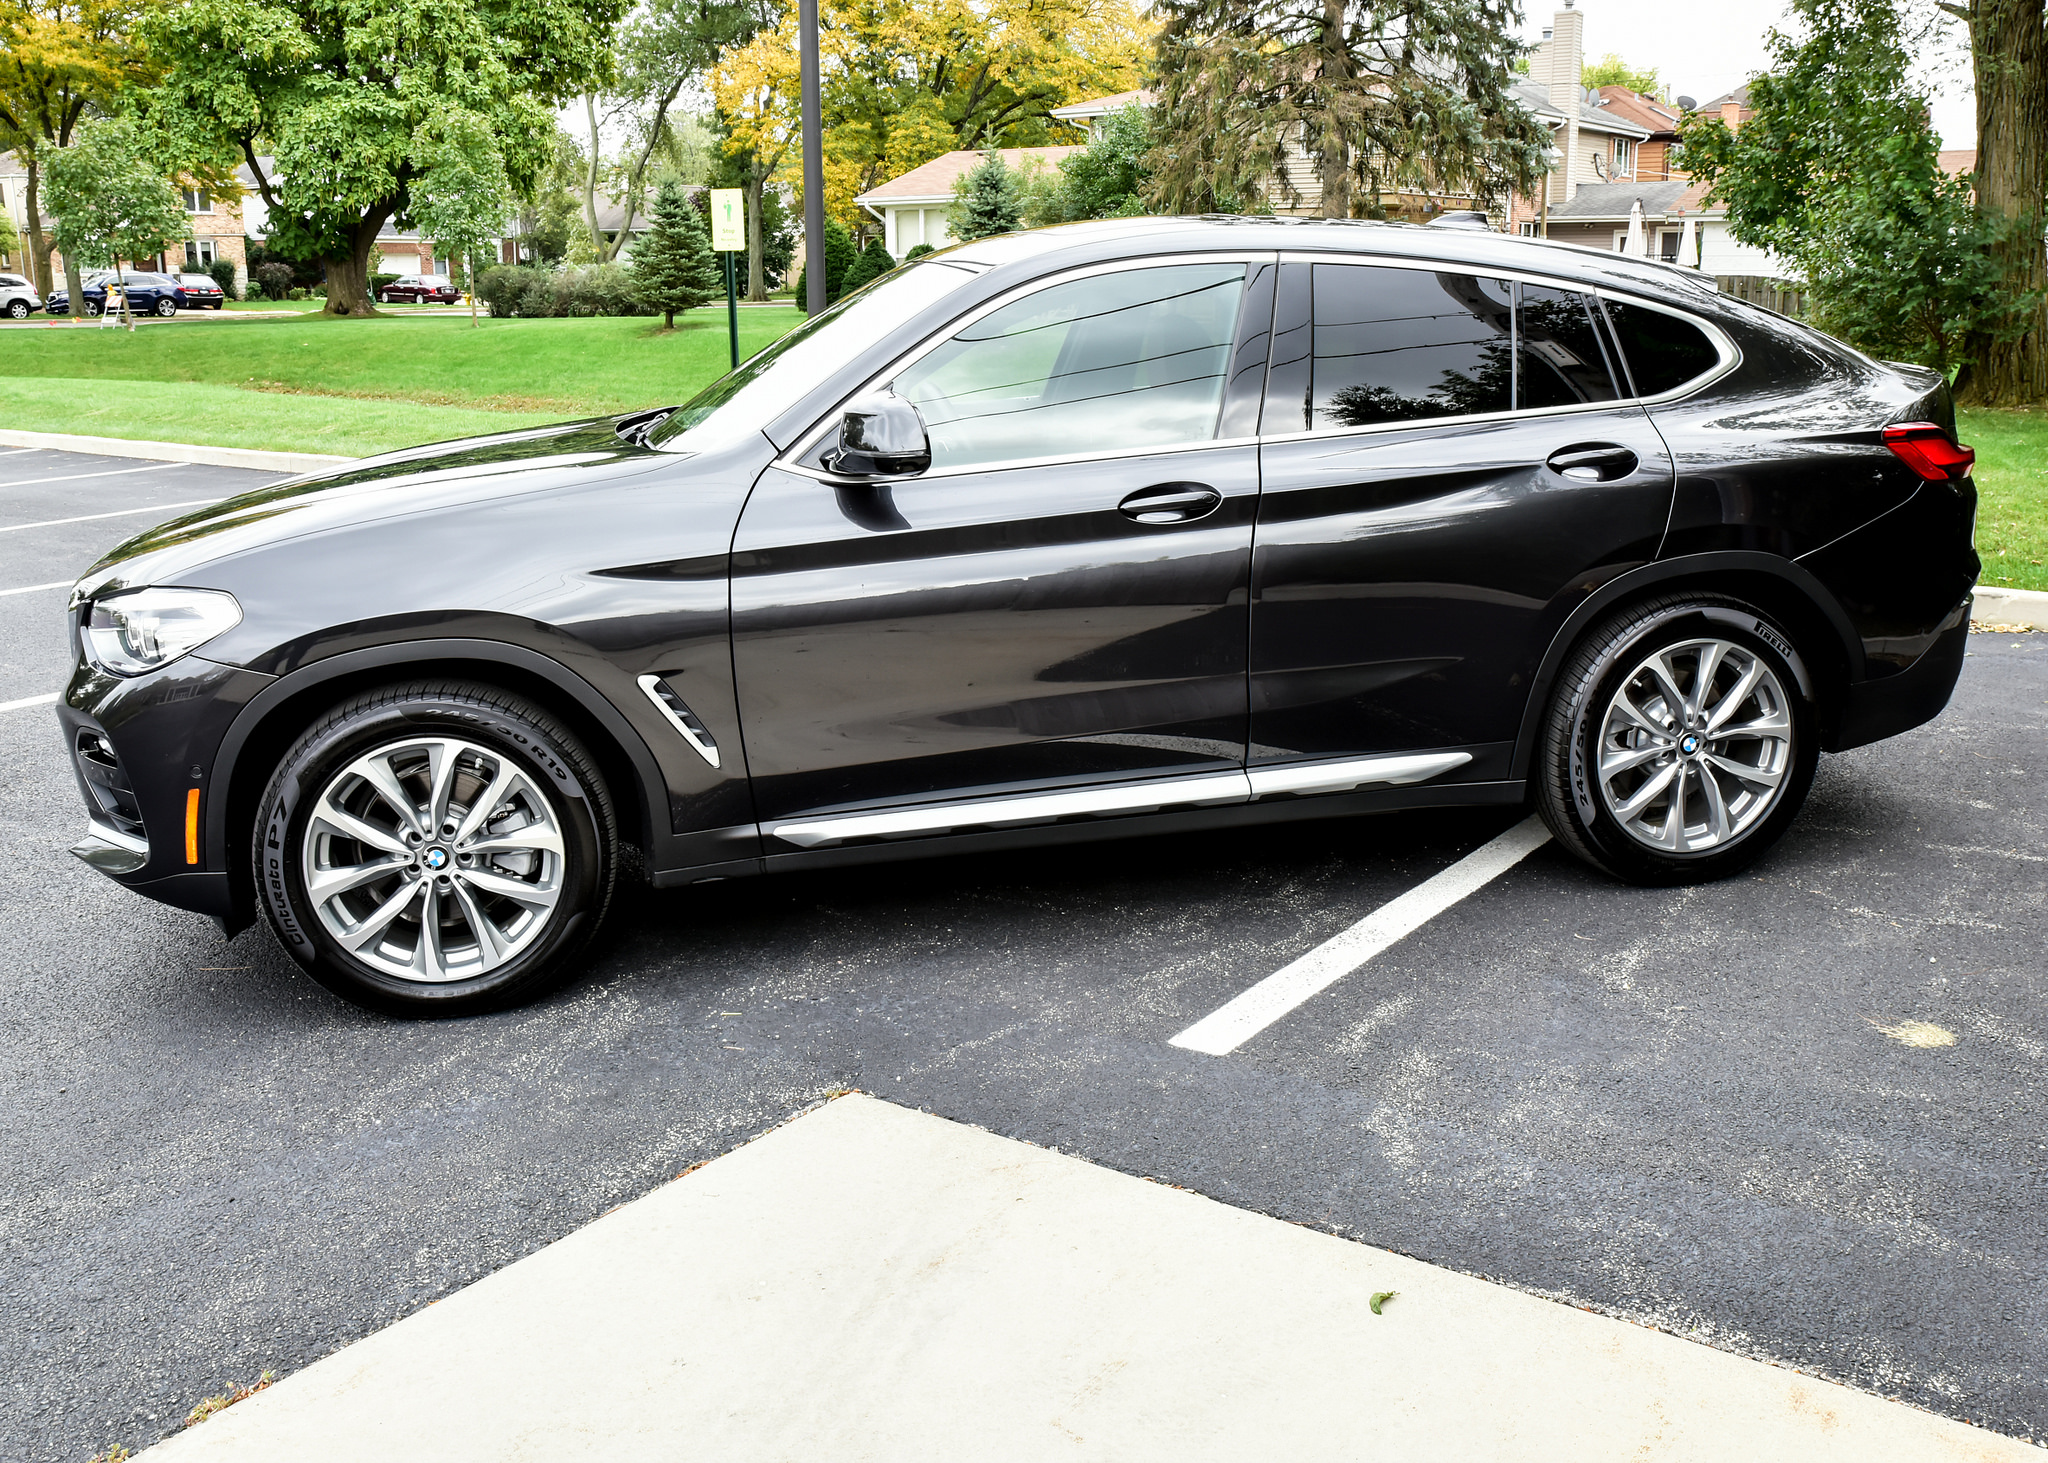 Party In The Front Pain In The Back The Bmw X4 Reviewed Ars Technica